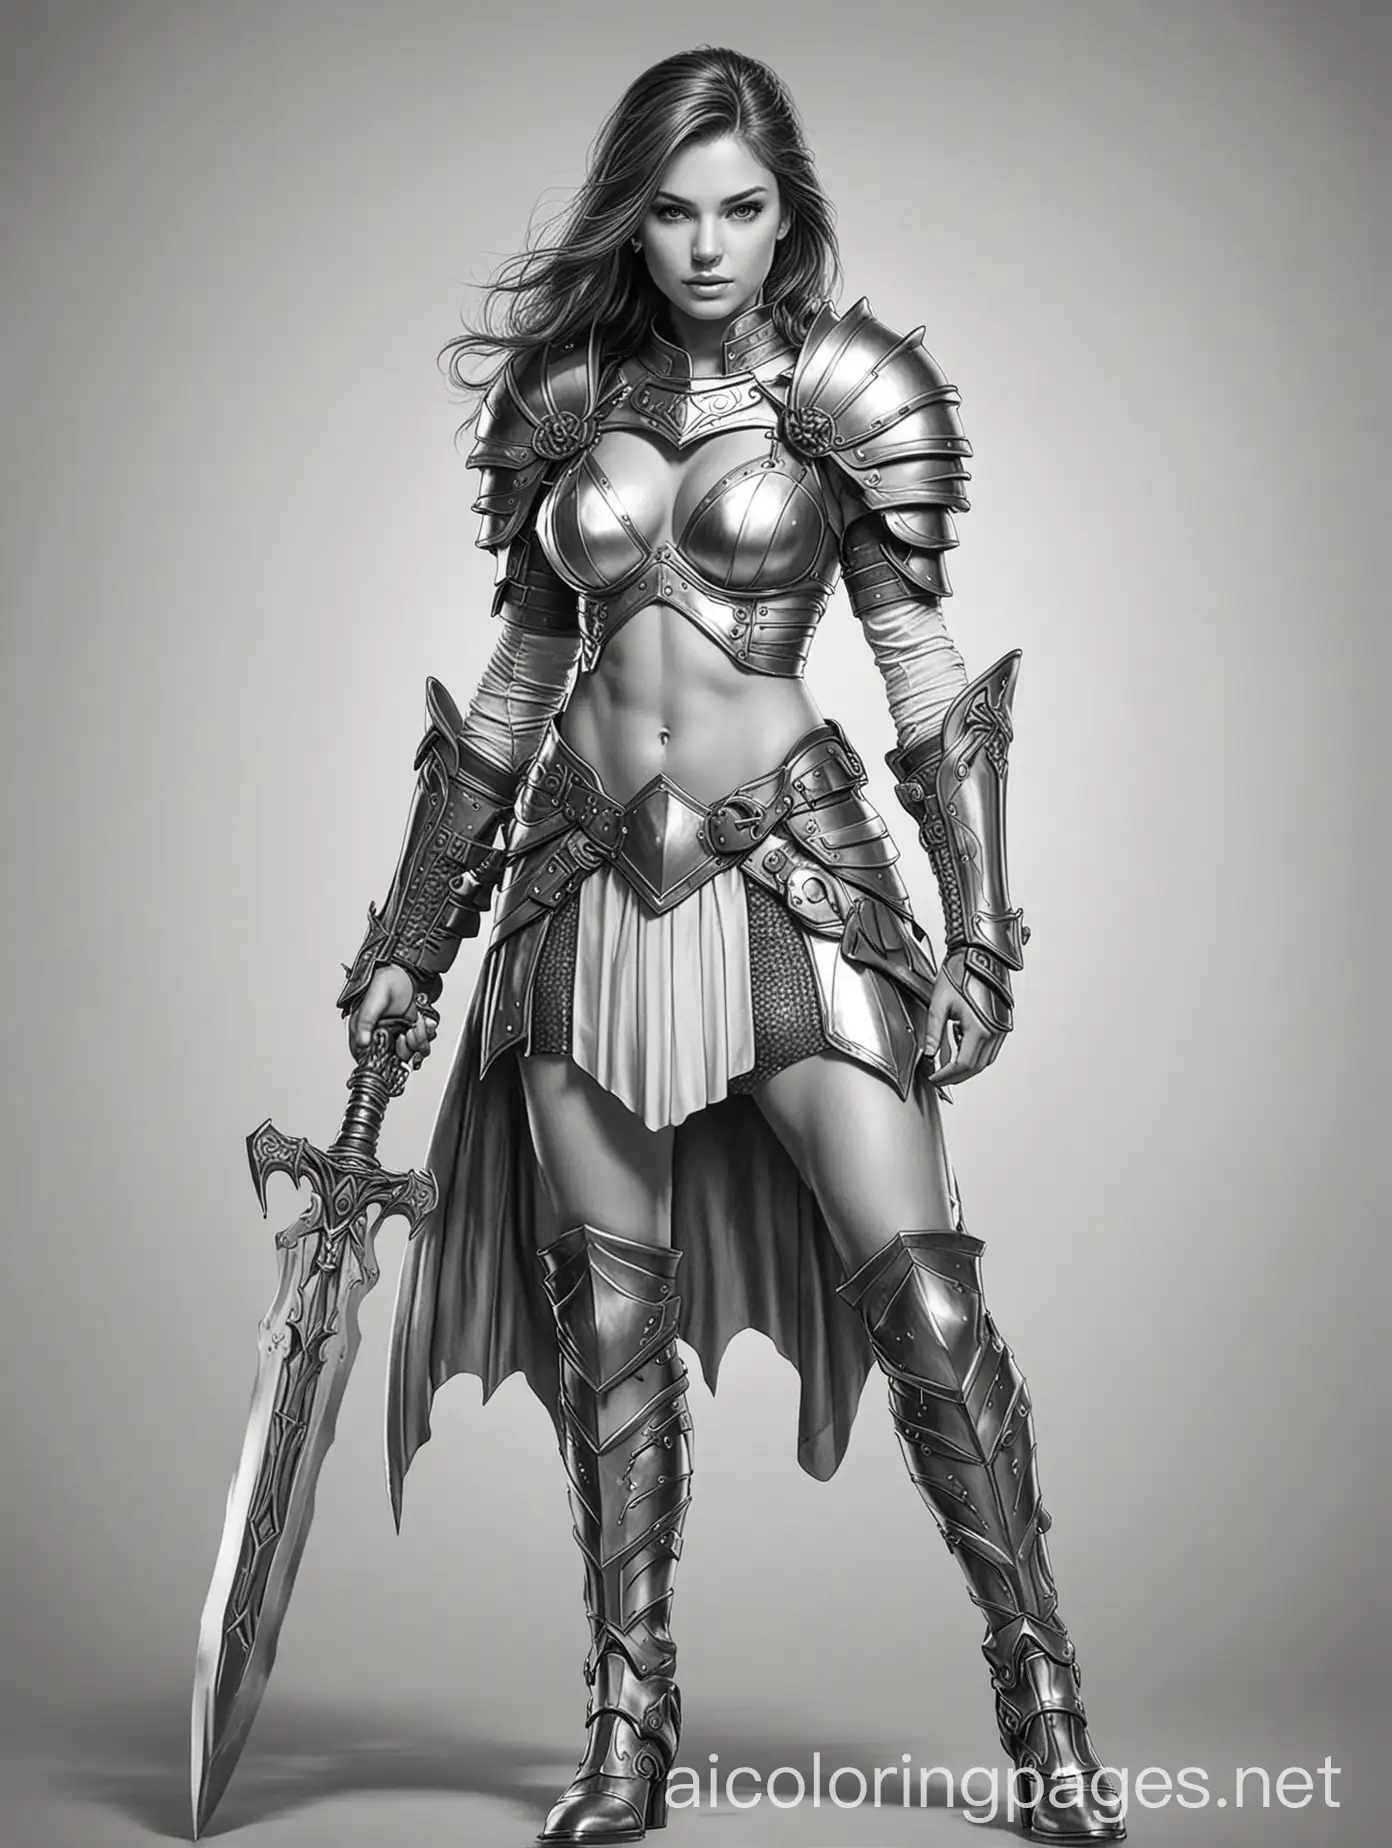 line art, outline, black and white drawing, to color, Coloring Book, ColoringBookAF, realistic, heroic fantasy, full body shot, young 14 year old teen sexy warrior woman, sexy light armor, big metal boots, metal skirt, metal bra, pauldrons, ready to fight posing, Coloring Page, black and white, line art, white background, Simplicity, Ample White Space